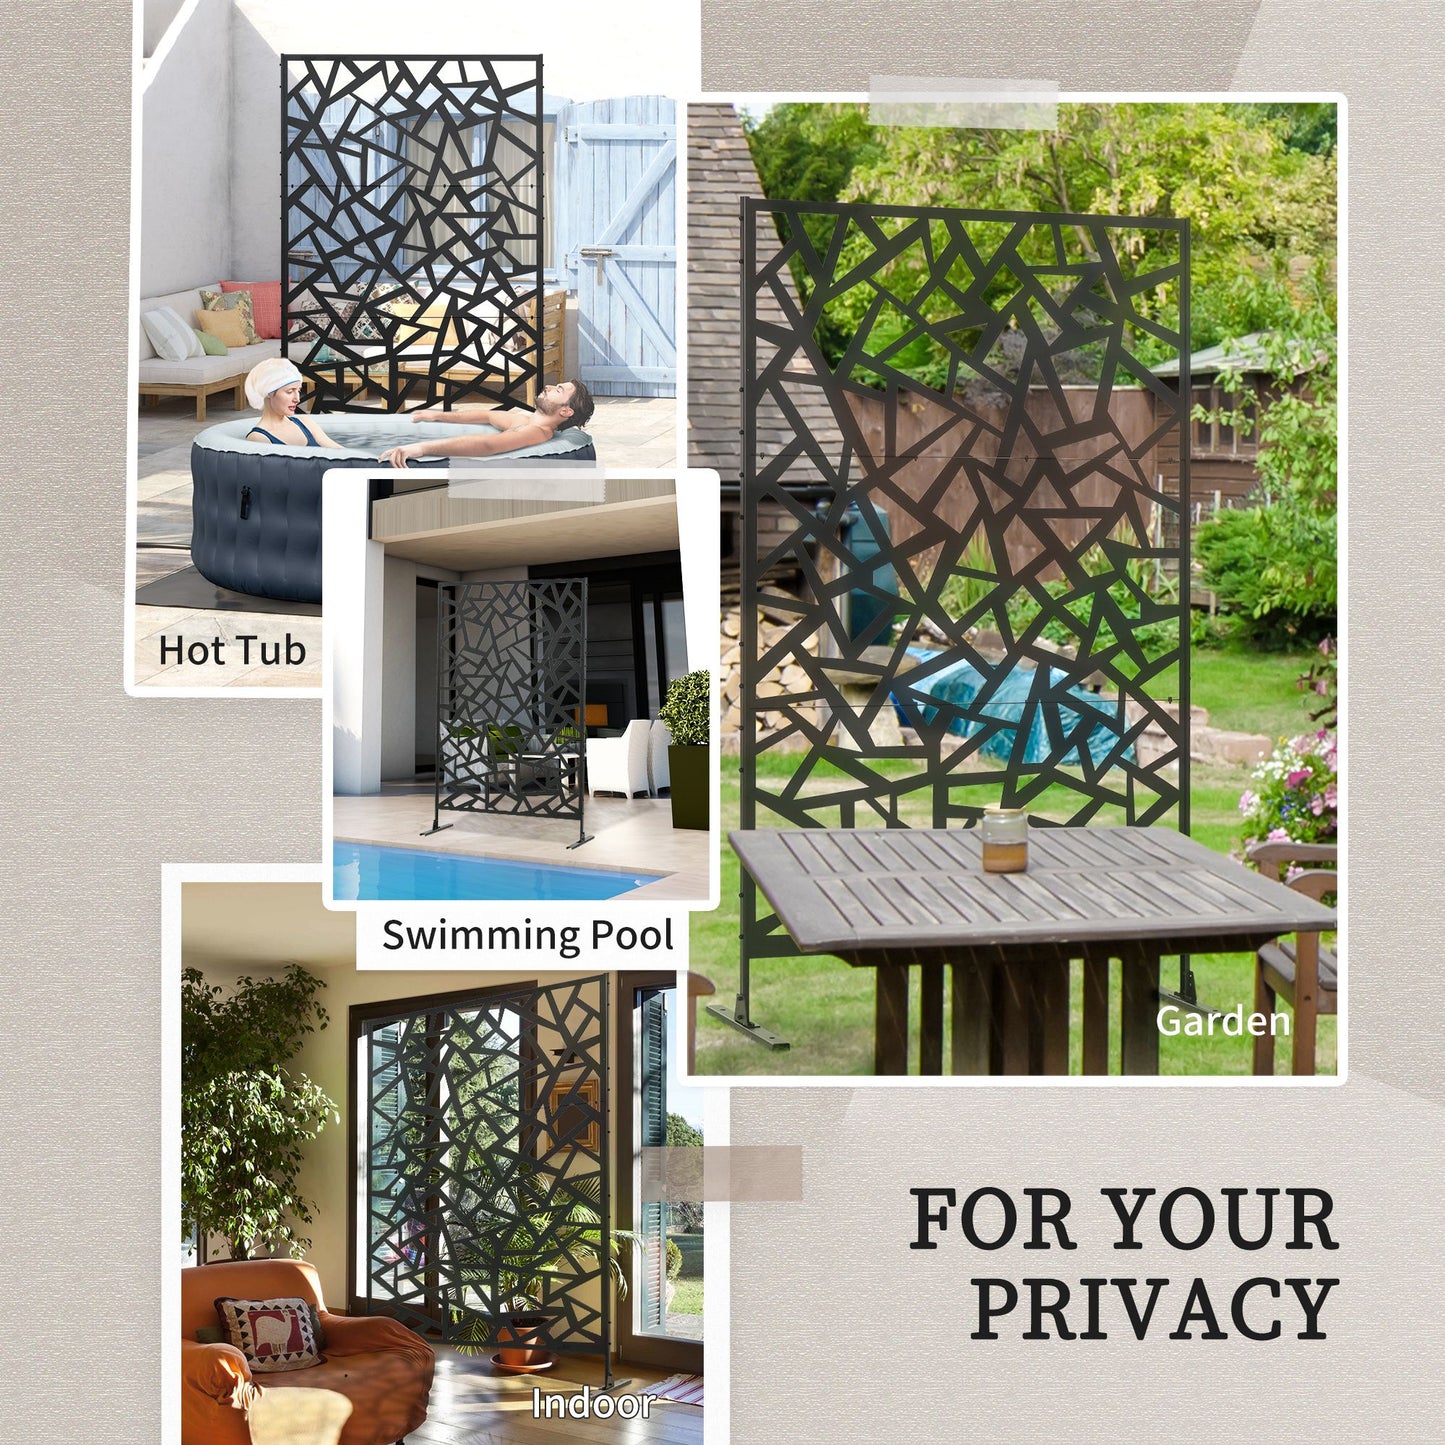 Outsunny Decorative Divider: Freestanding Metal Partition Screen for Patio & Deck, Expandable